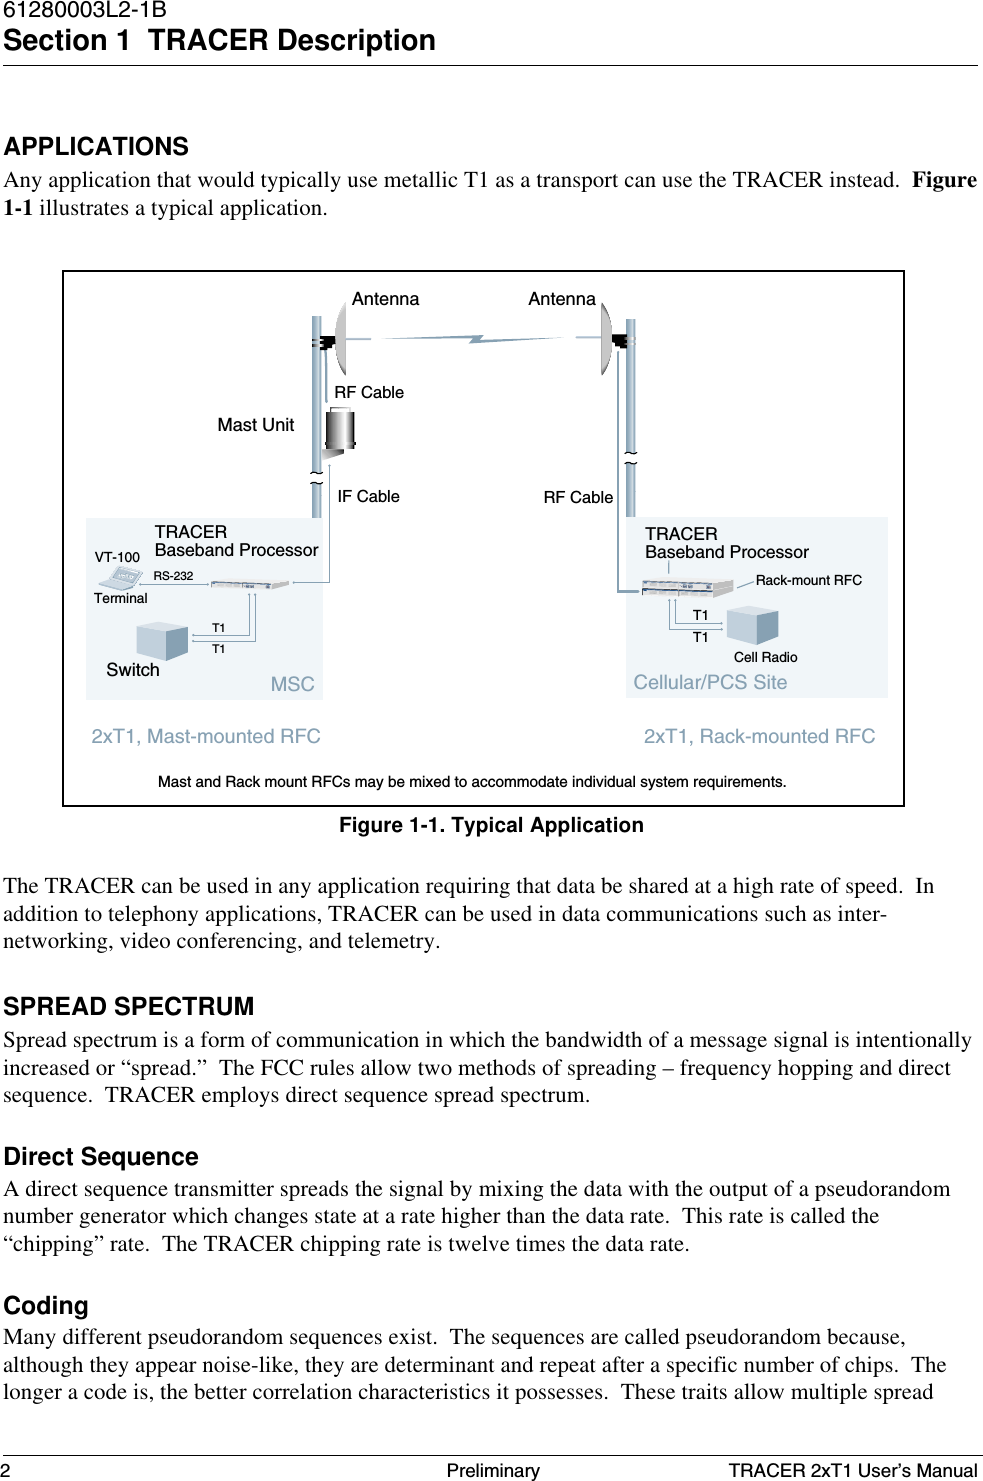 TRACER 2xT1 User’s Manual61280003L2-1BSection 1  TRACER Description2 PreliminaryAPPLICATIONSAny application that would typically use metallic T1 as a transport can use the TRACER instead.  Figure1-1 illustrates a typical application.The TRACER can be used in any application requiring that data be shared at a high rate of speed.  Inaddition to telephony applications, TRACER can be used in data communications such as inter-networking, video conferencing, and telemetry.SPREAD SPECTRUMSpread spectrum is a form of communication in which the bandwidth of a message signal is intentionallyincreased or “spread.”  The FCC rules allow two methods of spreading – frequency hopping and directsequence.  TRACER employs direct sequence spread spectrum.Direct SequenceA direct sequence transmitter spreads the signal by mixing the data with the output of a pseudorandomnumber generator which changes state at a rate higher than the data rate.  This rate is called the“chipping” rate.  The TRACER chipping rate is twelve times the data rate.CodingMany different pseudorandom sequences exist.  The sequences are called pseudorandom because,although they appear noise-like, they are determinant and repeat after a specific number of chips.  Thelonger a code is, the better correlation characteristics it possesses.  These traits allow multiple spreadFigure 1-1. Typical ApplicationTerminalVT-100Switch Cell RadioRS-232Cellular/PCS SiteAntenna AntennaIF CableRF CableMast UnitMast and Rack mount RFCs may be mixed to accommodate individual system requirements.TRACERBaseband Processor2xT1, Rack-mounted RFCTRACERBaseband ProcessorT1T1T1T1MSCT1BDATA AISBDATA AIST1POWTRANSCEITRACER2xT1, Mast-mounted RFCTRACERT1BPDATA AISBDATA AIST1POWTRANSCEITRACERRack-mount RFCRF Cable